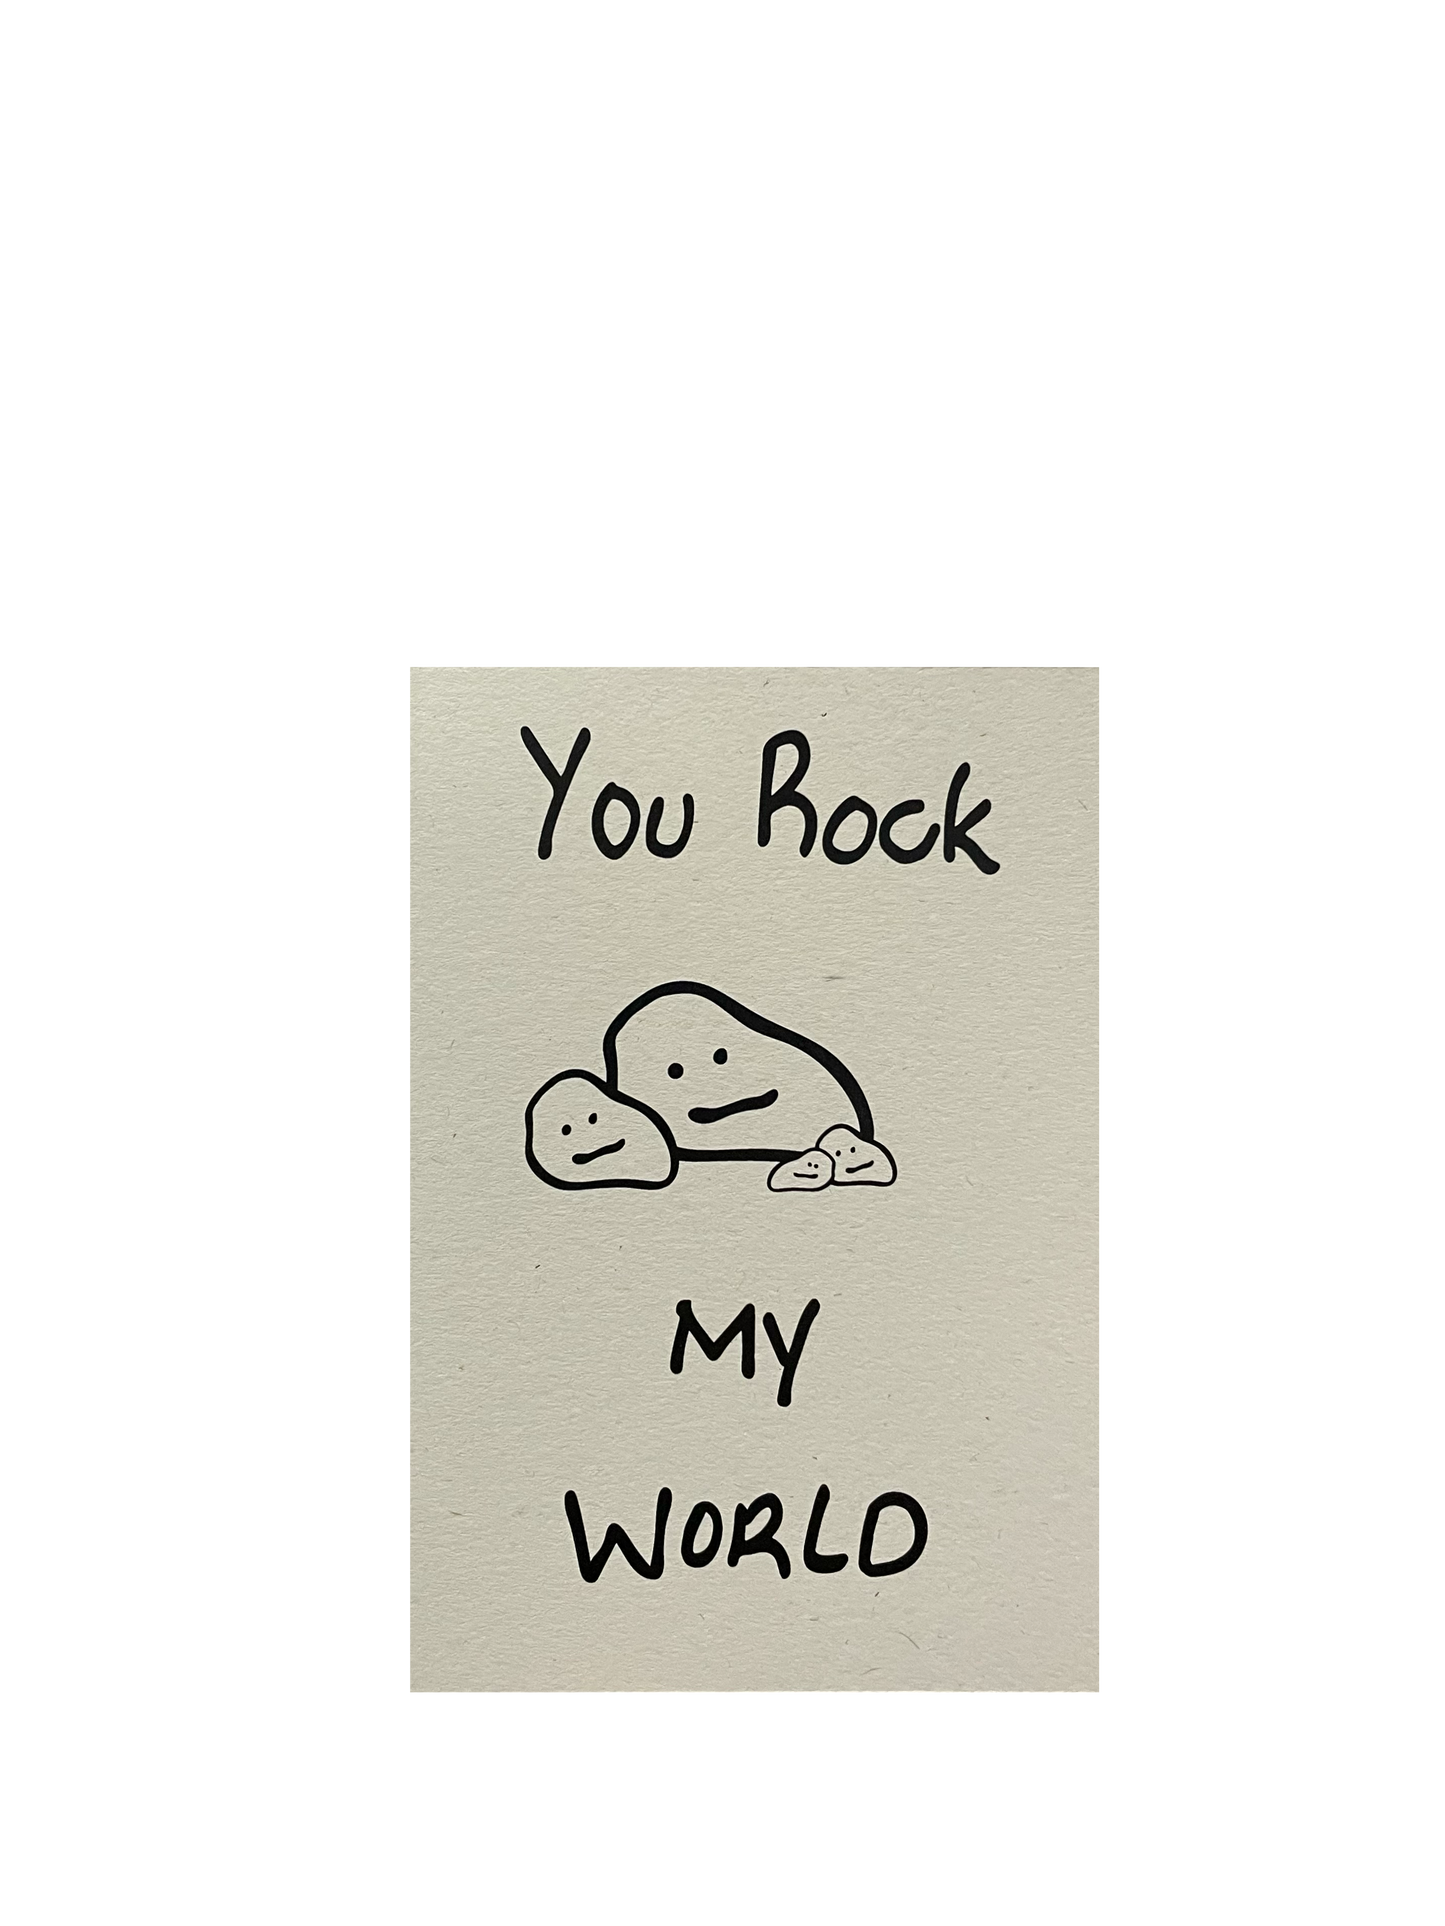 You Rock my World